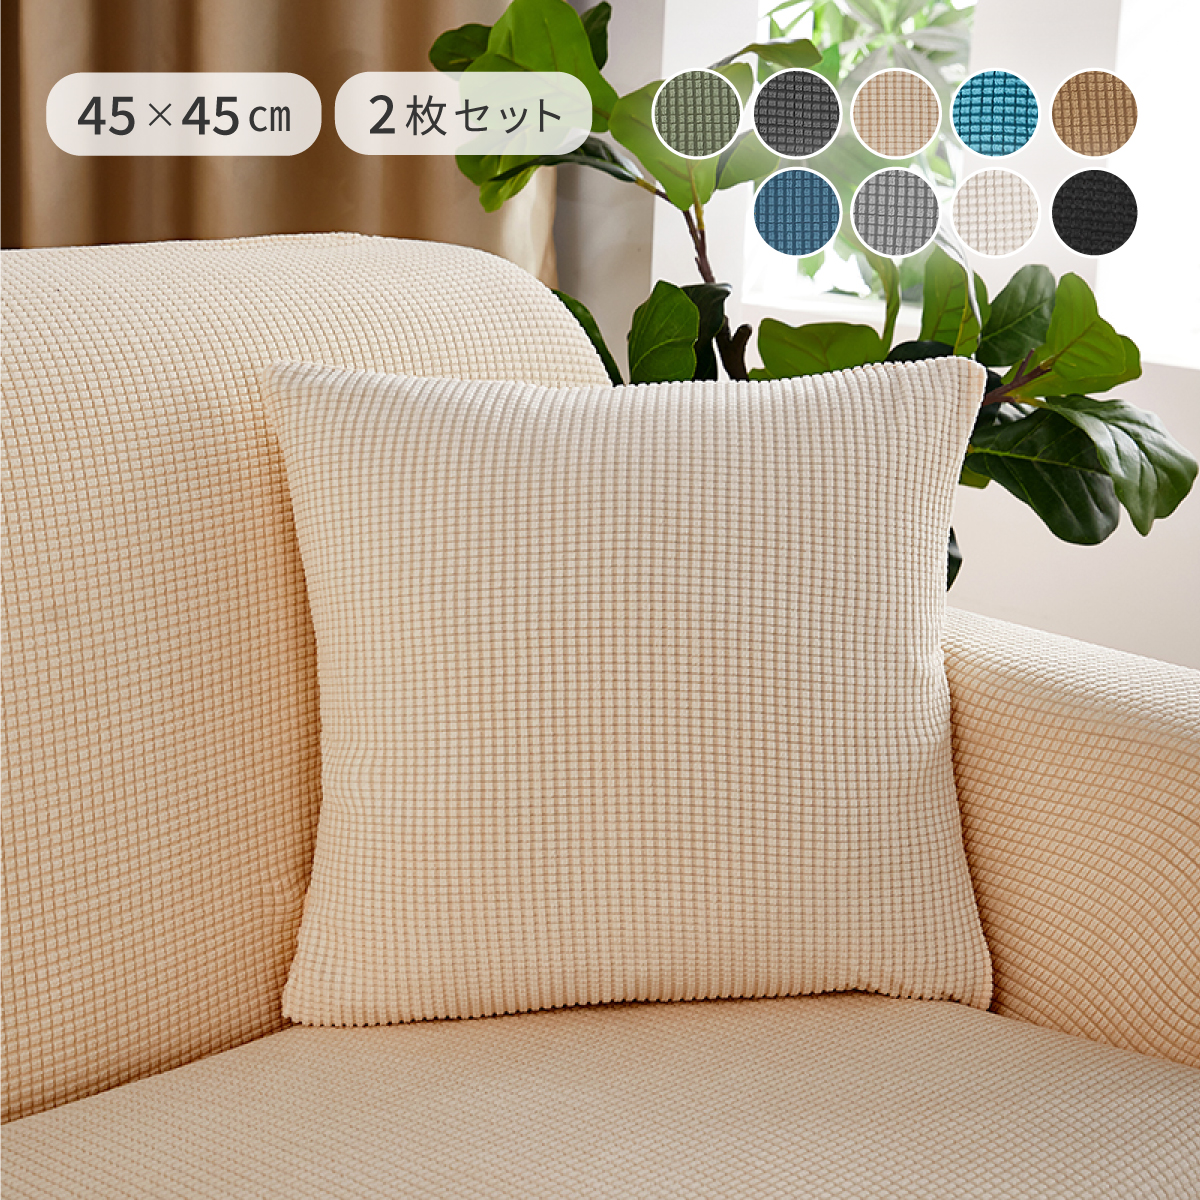  pillowcase 45×45 Northern Europe feeling of luxury winter 2 pieces set circle wash OK stylish soft lovely dirt prevention ... plain interior change cover all season elasticity 